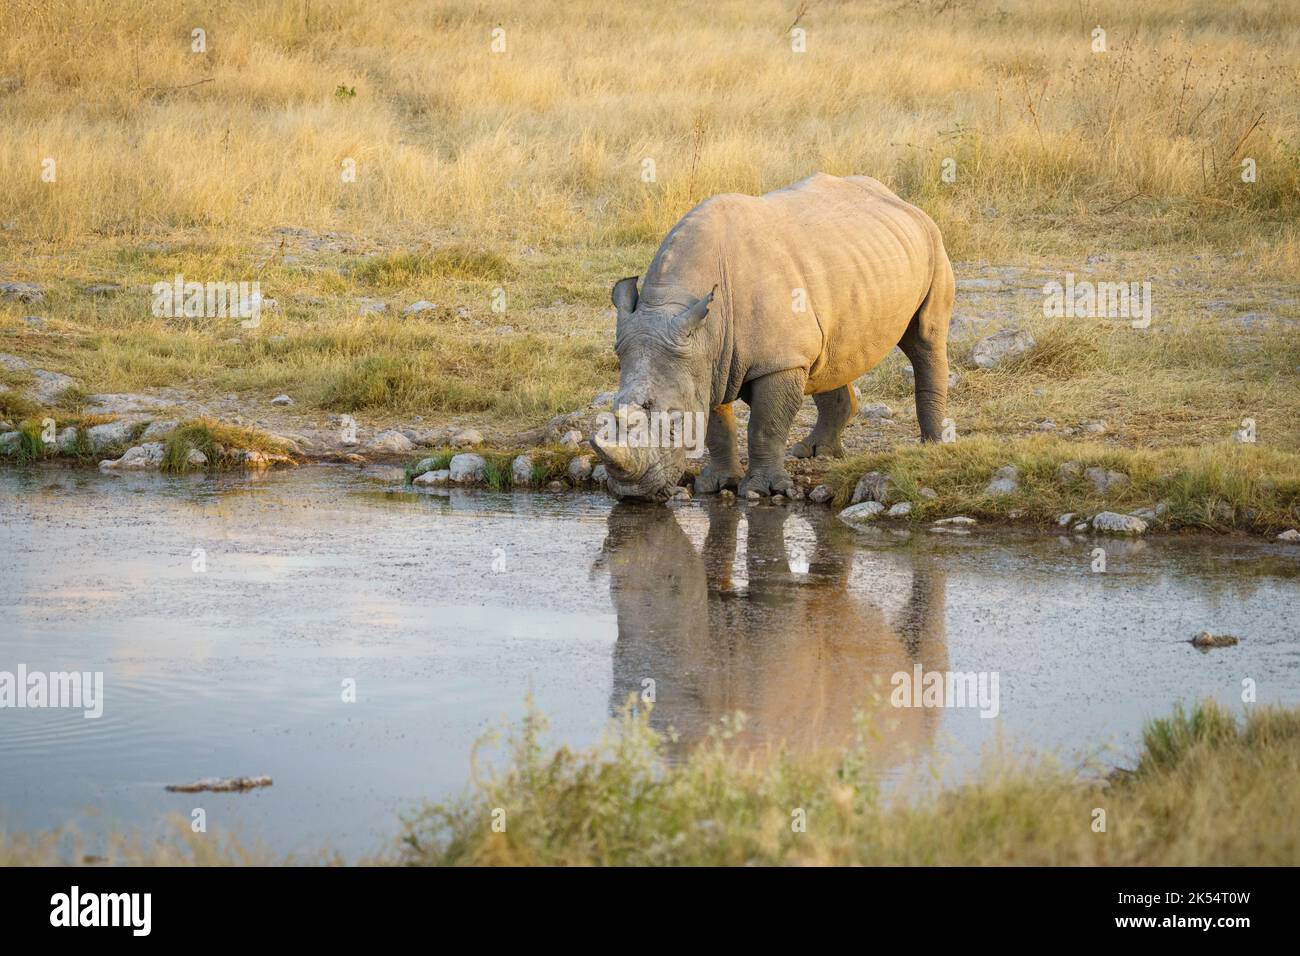 White rhino (Ceratotherium simum) standing at a waterhole with reflection in the water. Etosha National Park, Namibia, Africa Stock Photo